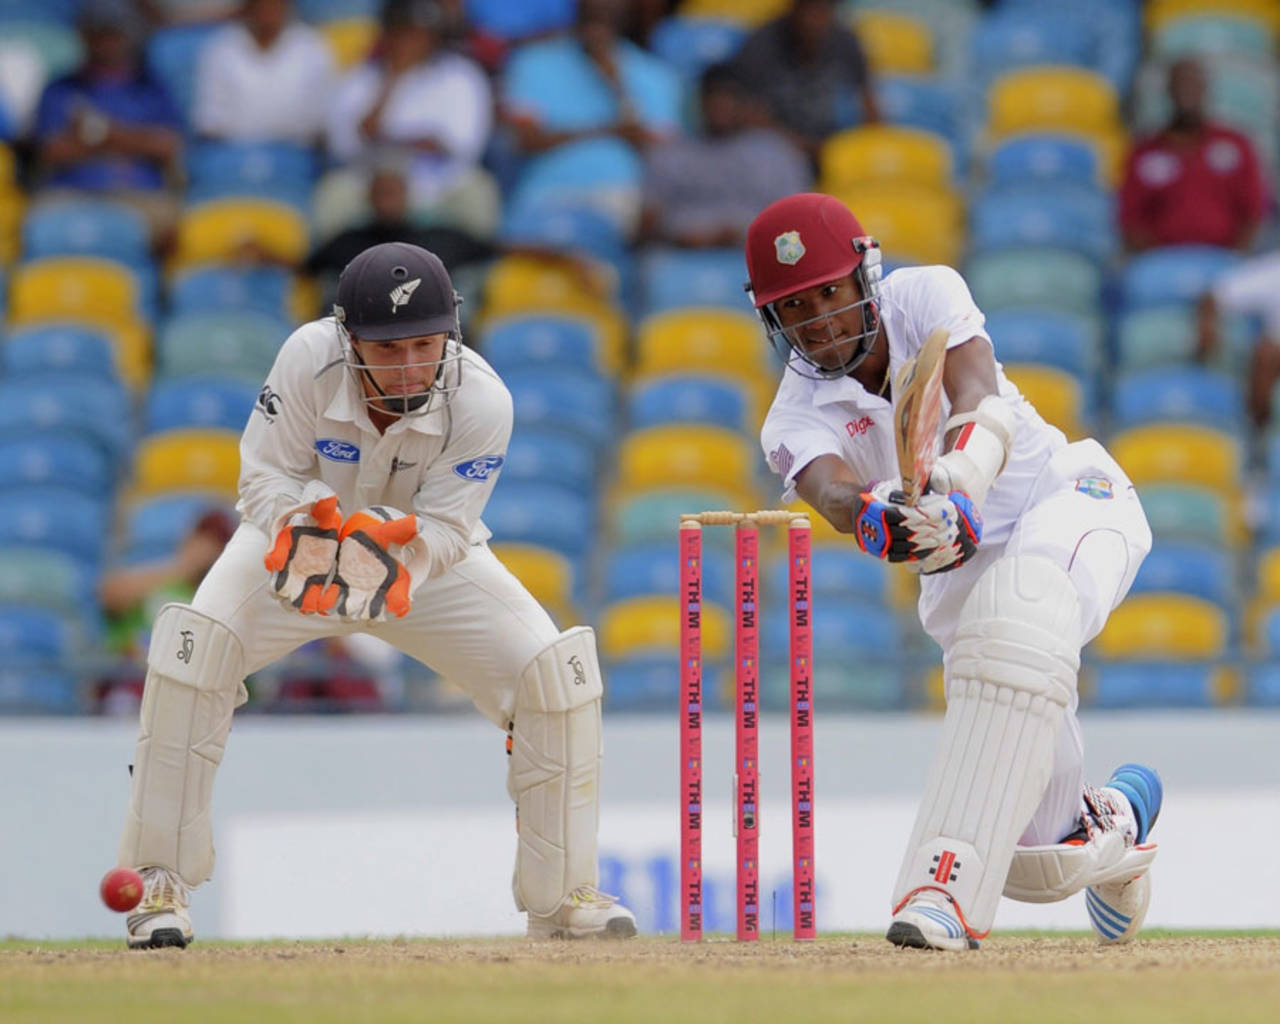 Kraigg Brathwaite, who looks more productive and able since his recall, lends stability to West Indies' line-up&nbsp;&nbsp;&bull;&nbsp;&nbsp;WICB